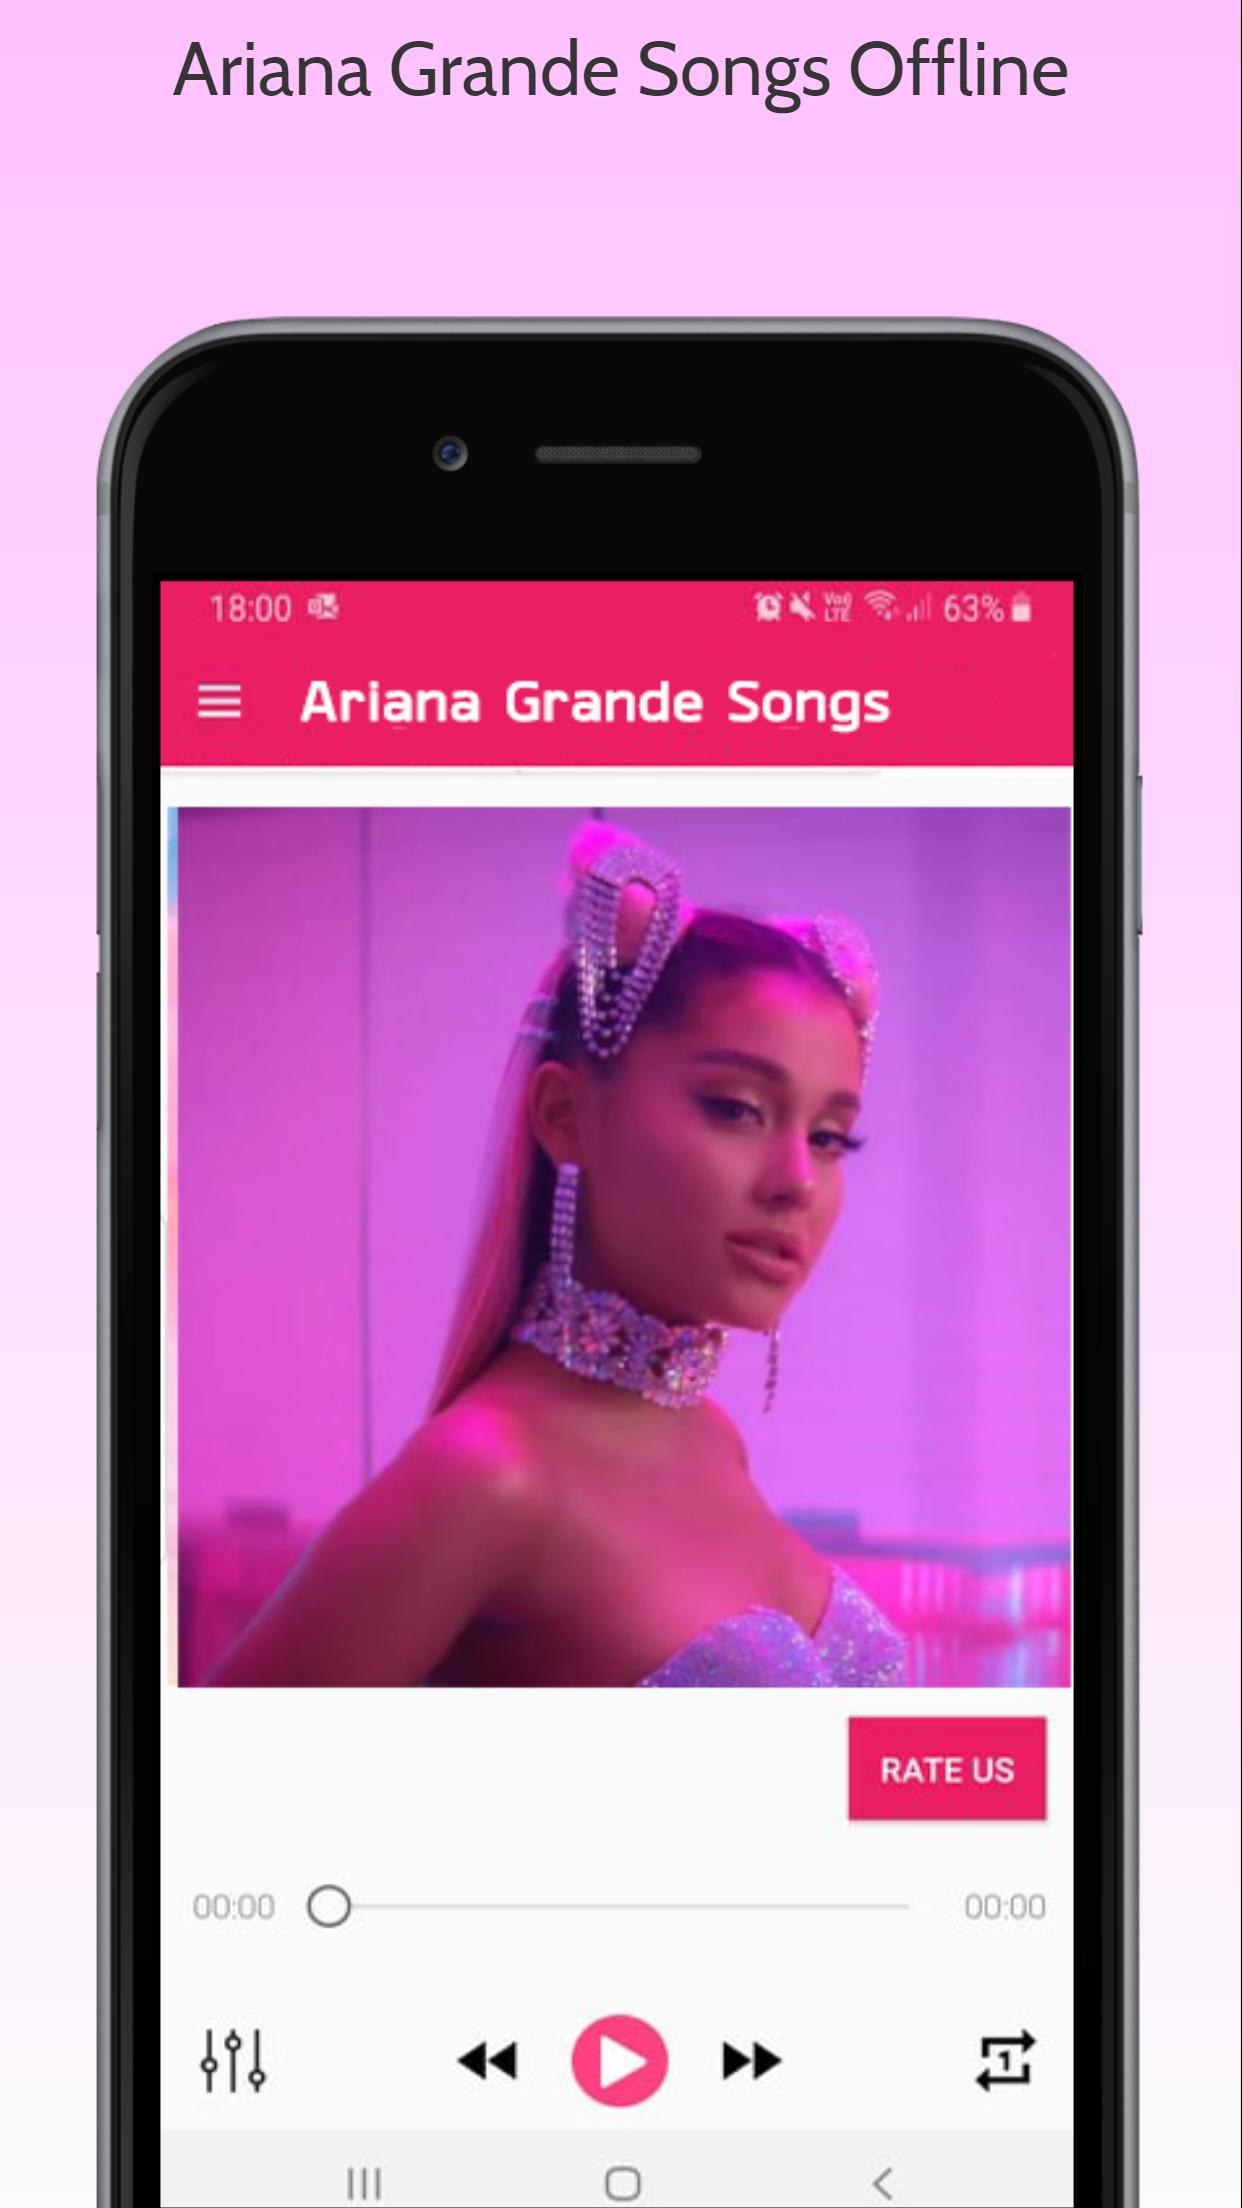 Ariana Grande Songs Offline 2019 For Android Apk Download